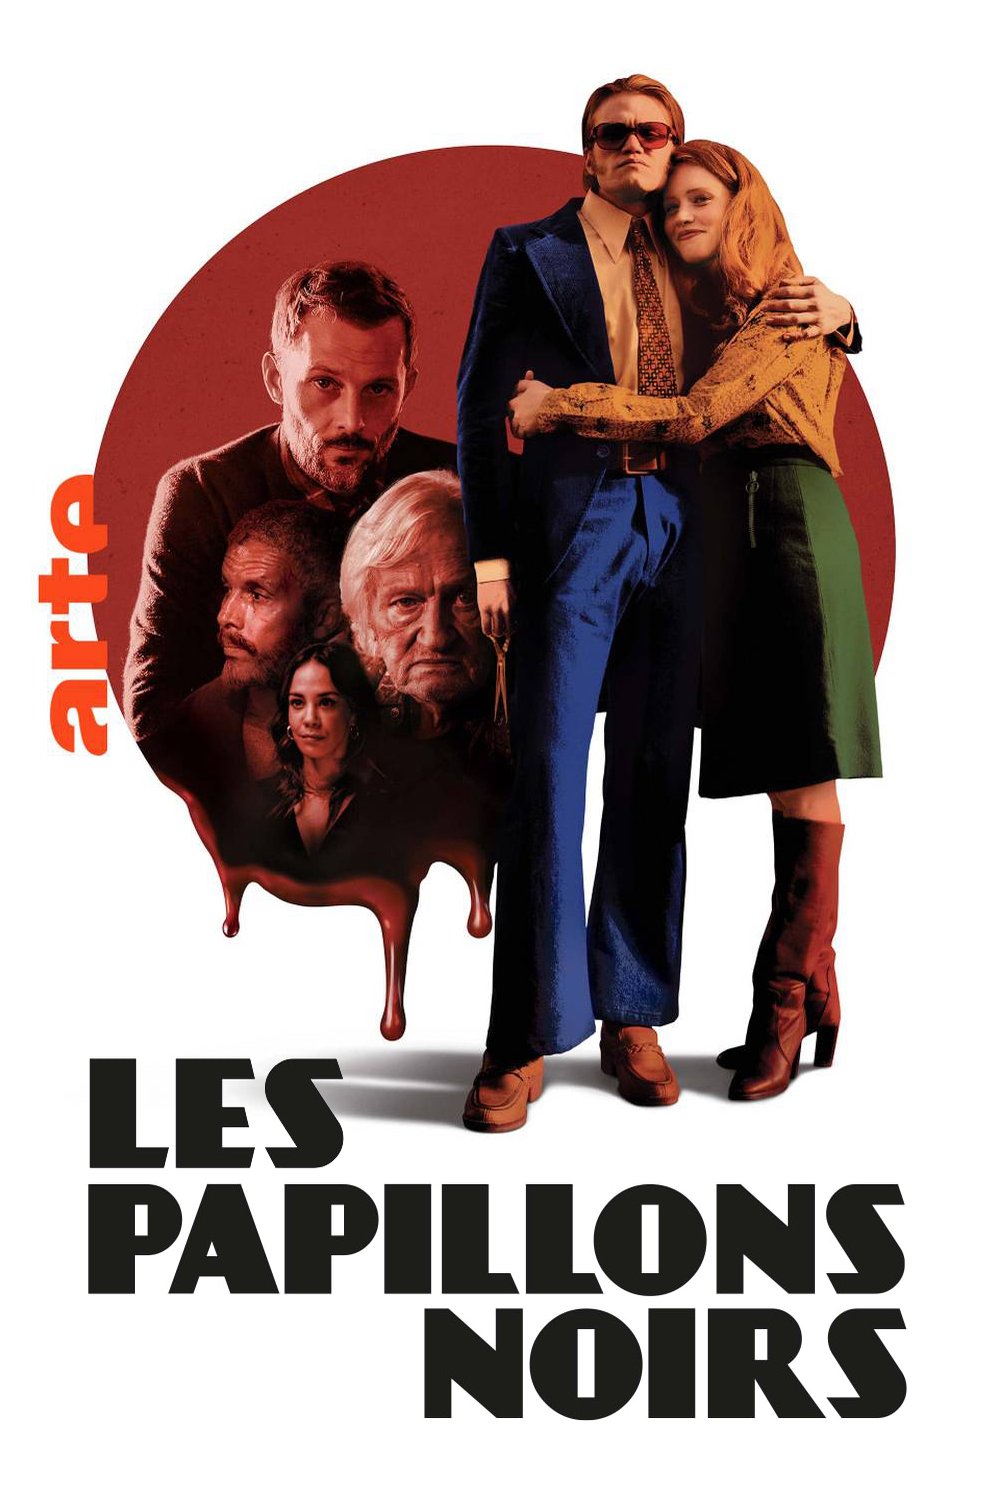 Poster of the movie Les papillons noirs